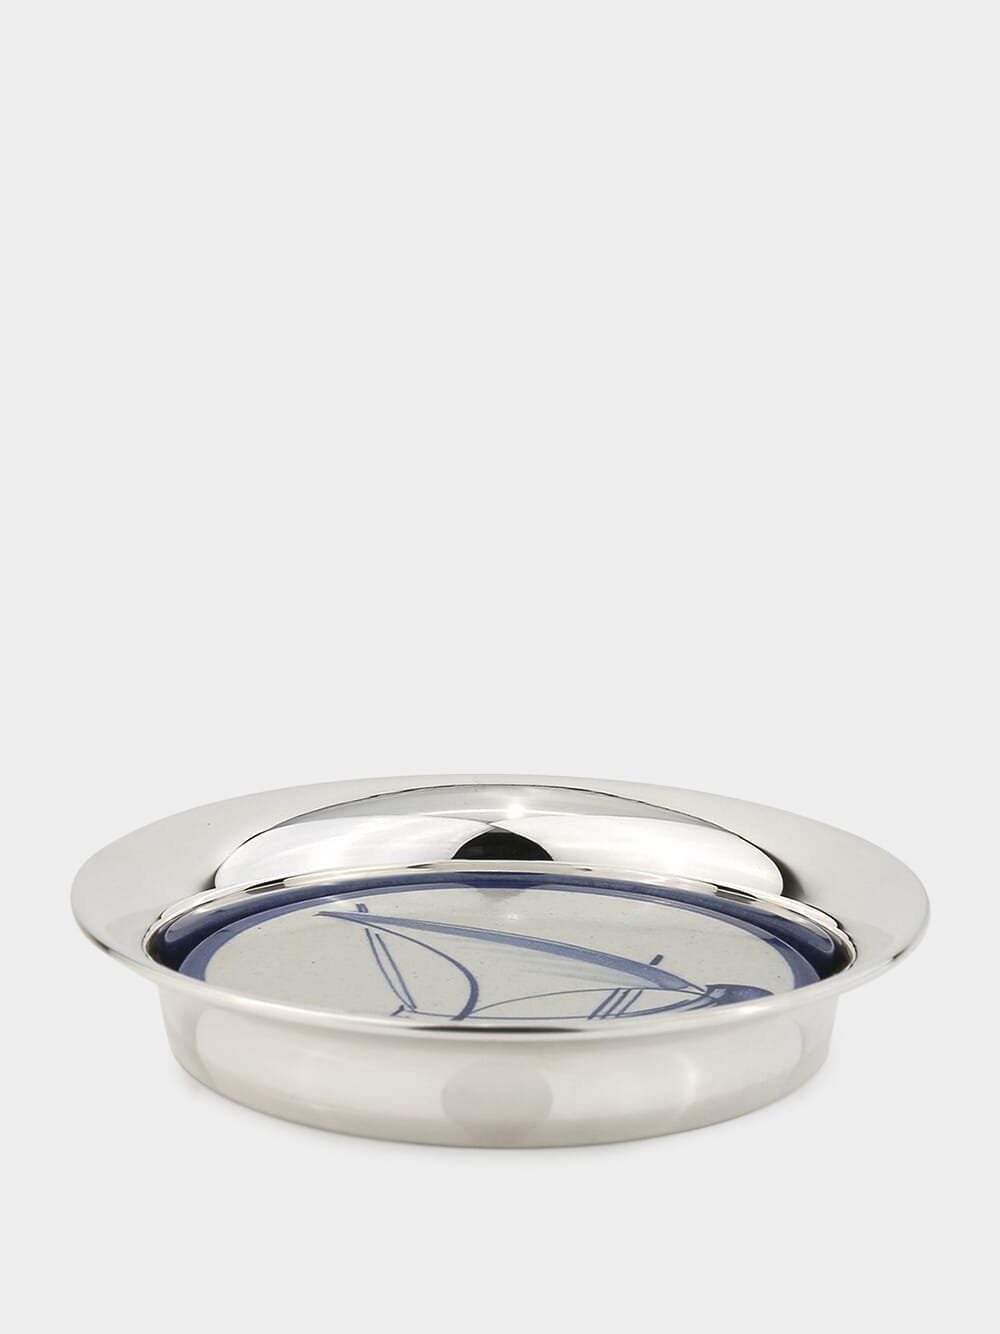 Leitão & IrmãoRound Salver In Silver And Portuguese Tile at Fashion Clinic